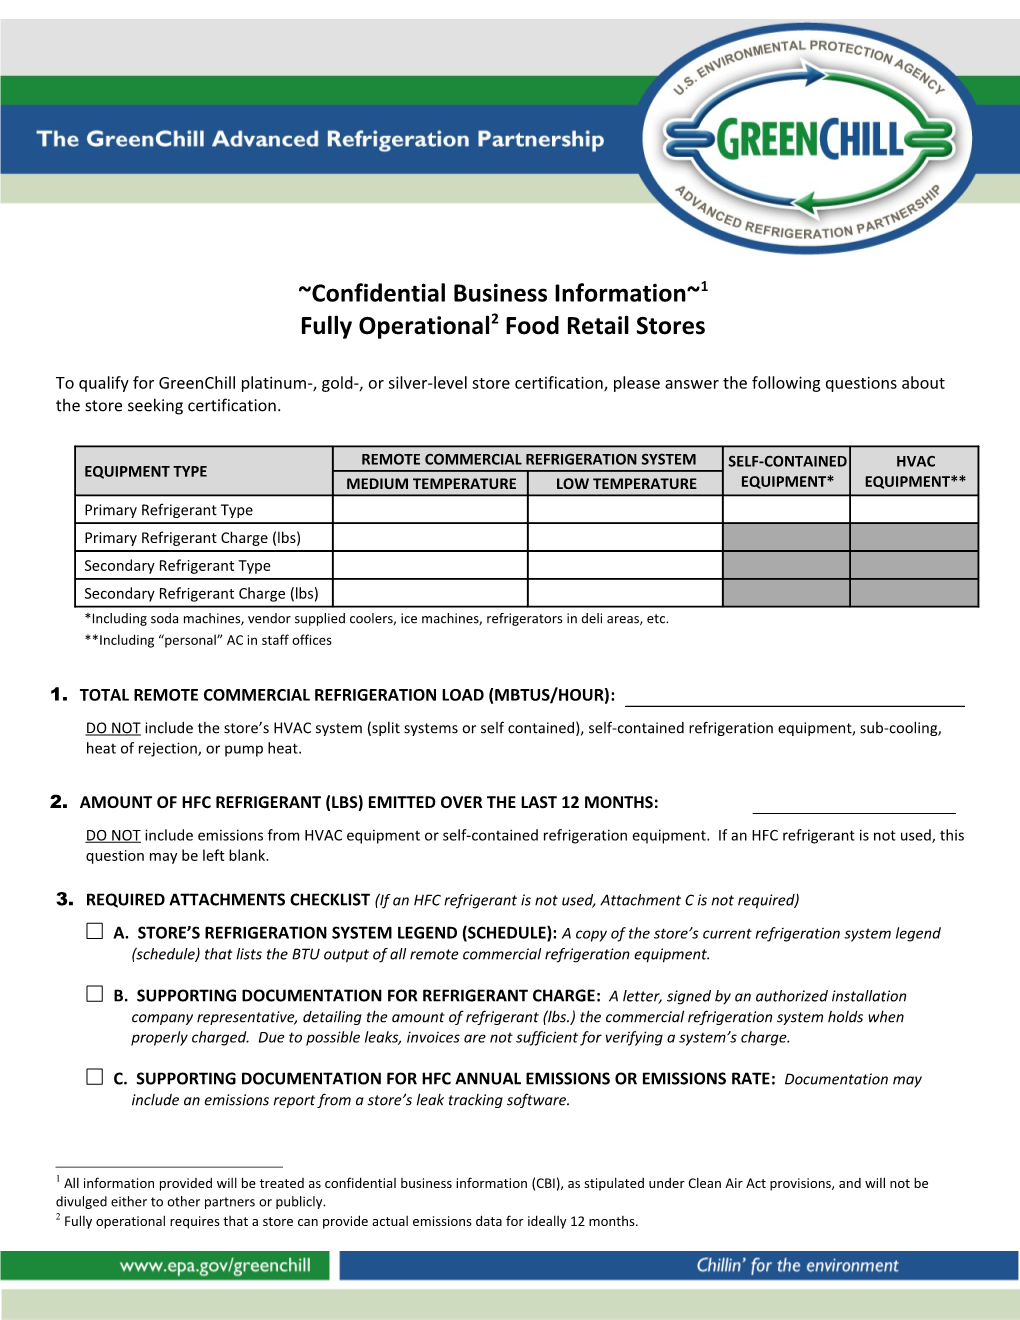 Fully Operational 2 Food Retail Stores